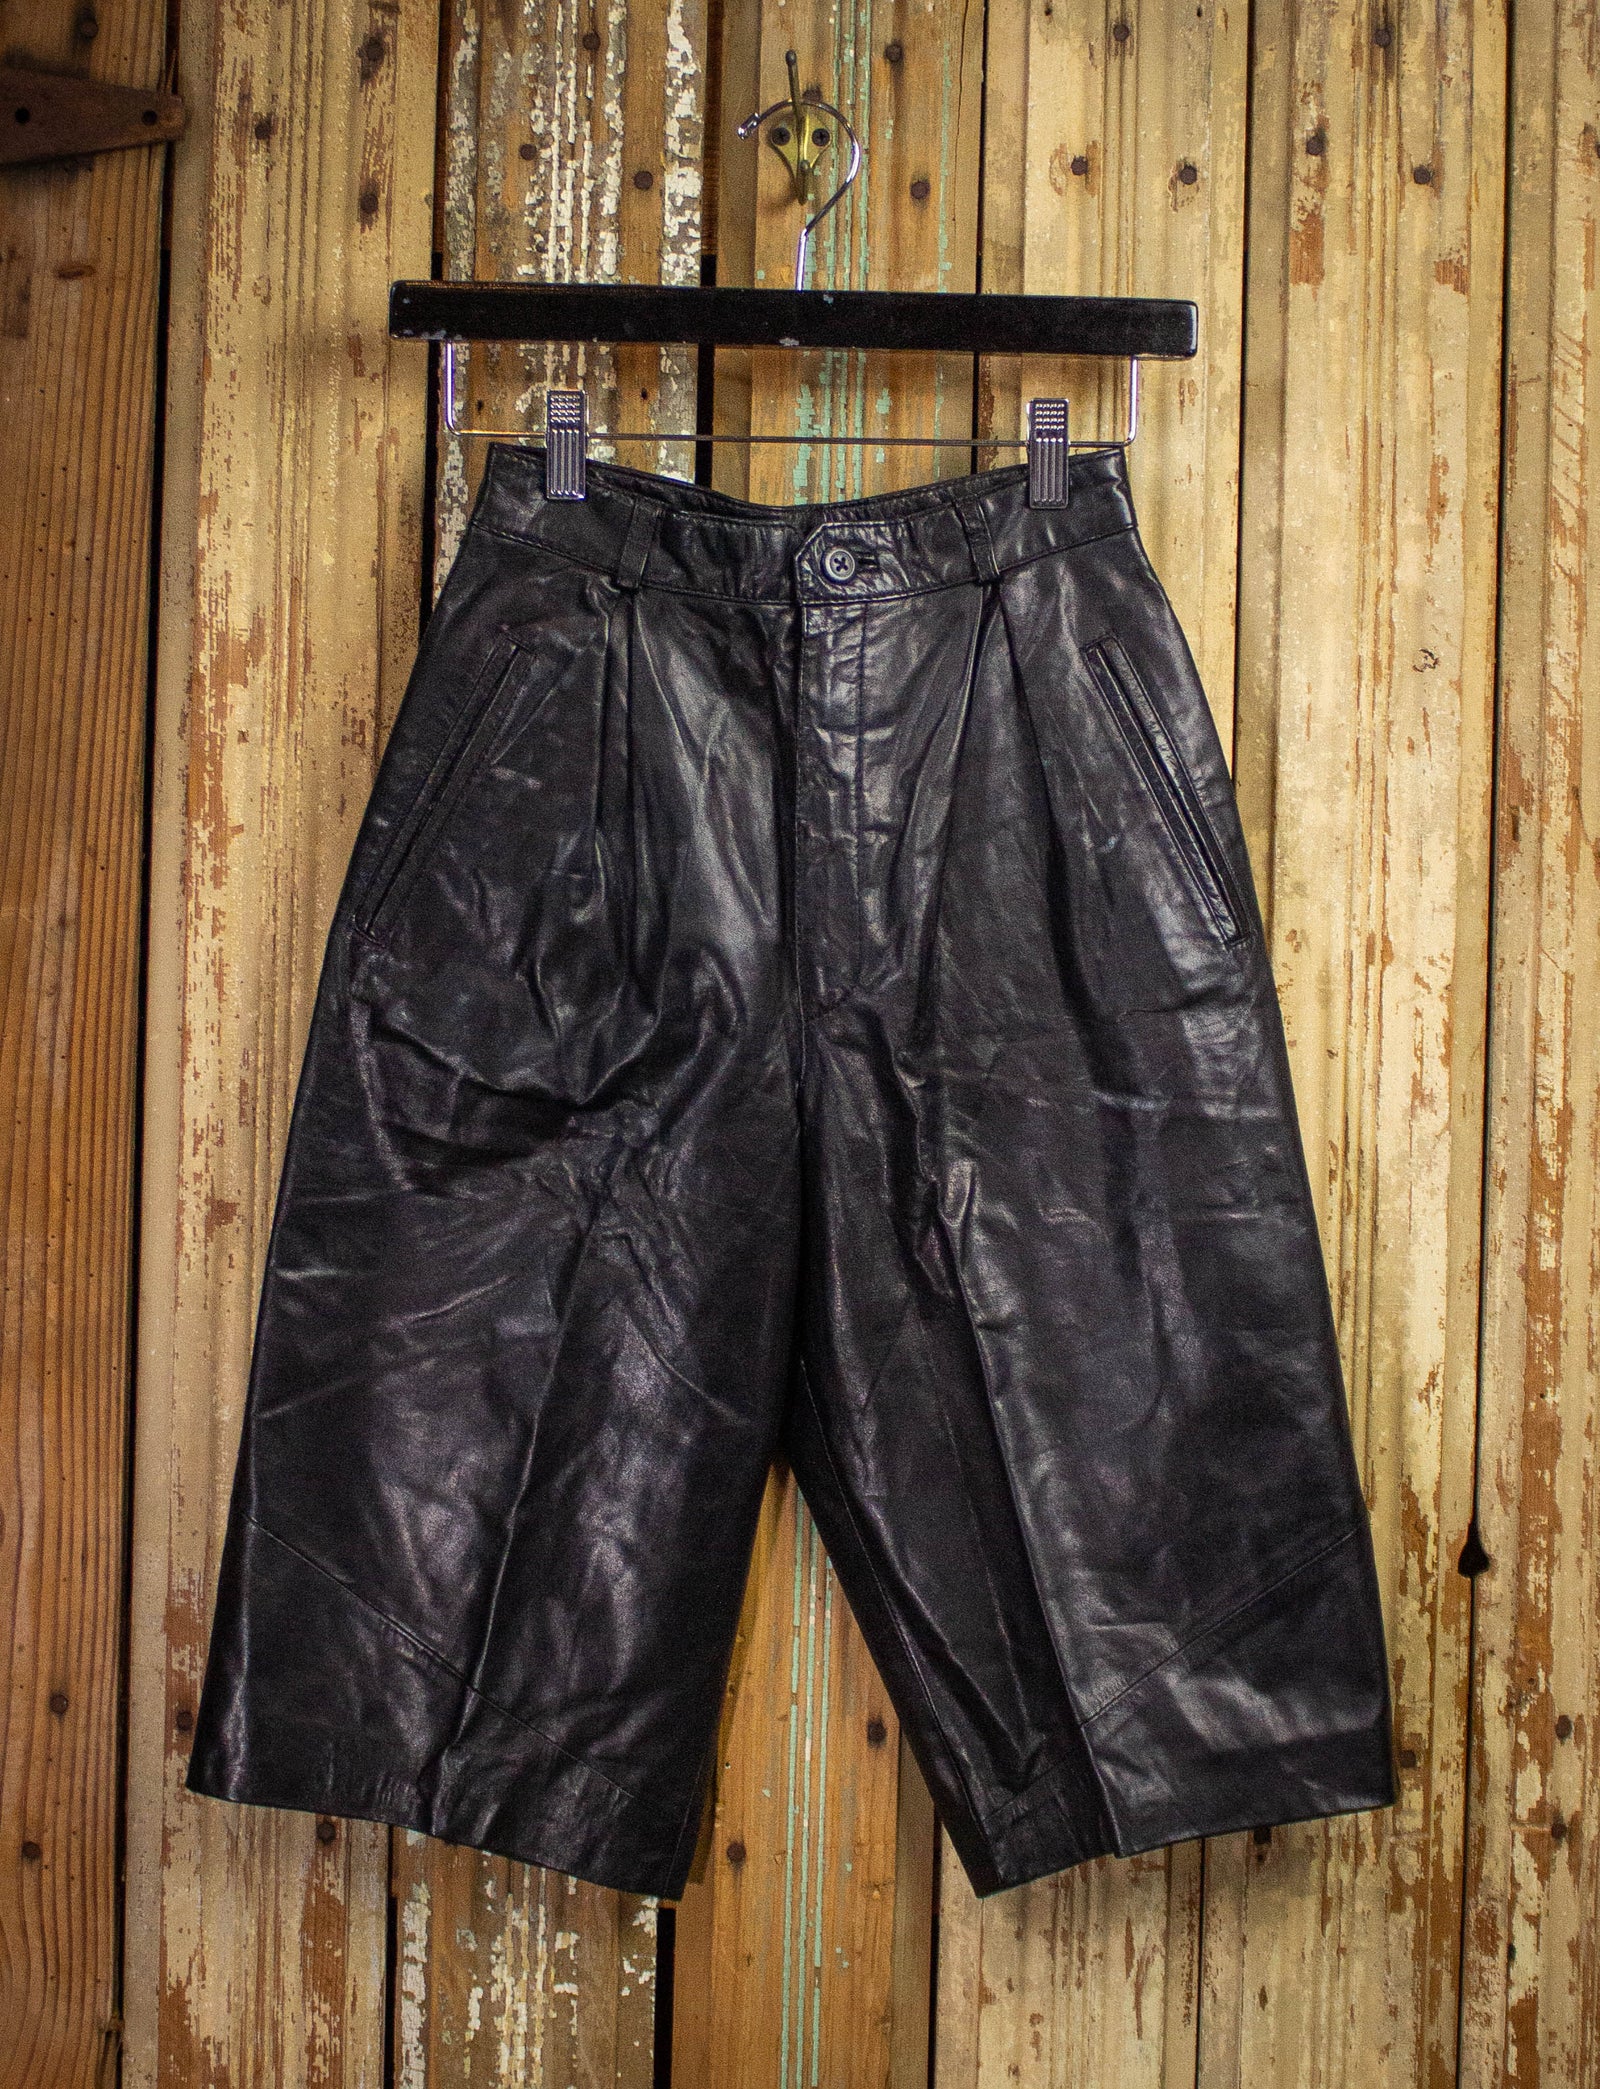 Vintage Wilsons Leather Shorts 80s Black 24w